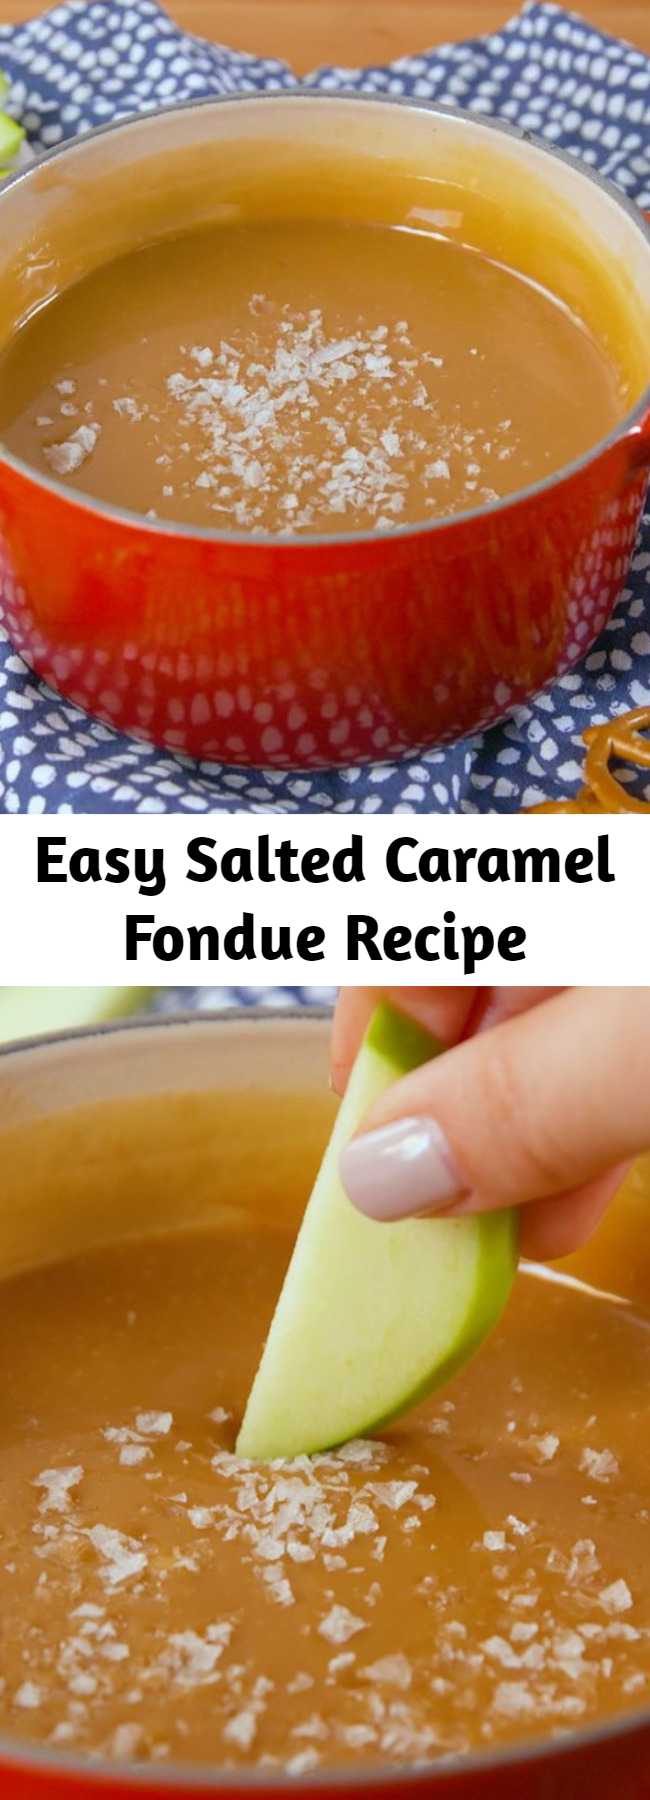 Easy Salted Caramel Fondue Recipe - "Fondue" sounds fancy and French, but it can be super simple to whip together. Like make it, from beginning to end, in less than 20 minutes easy. At least, if we're talking about caramel fondue — our new favorite party trick.